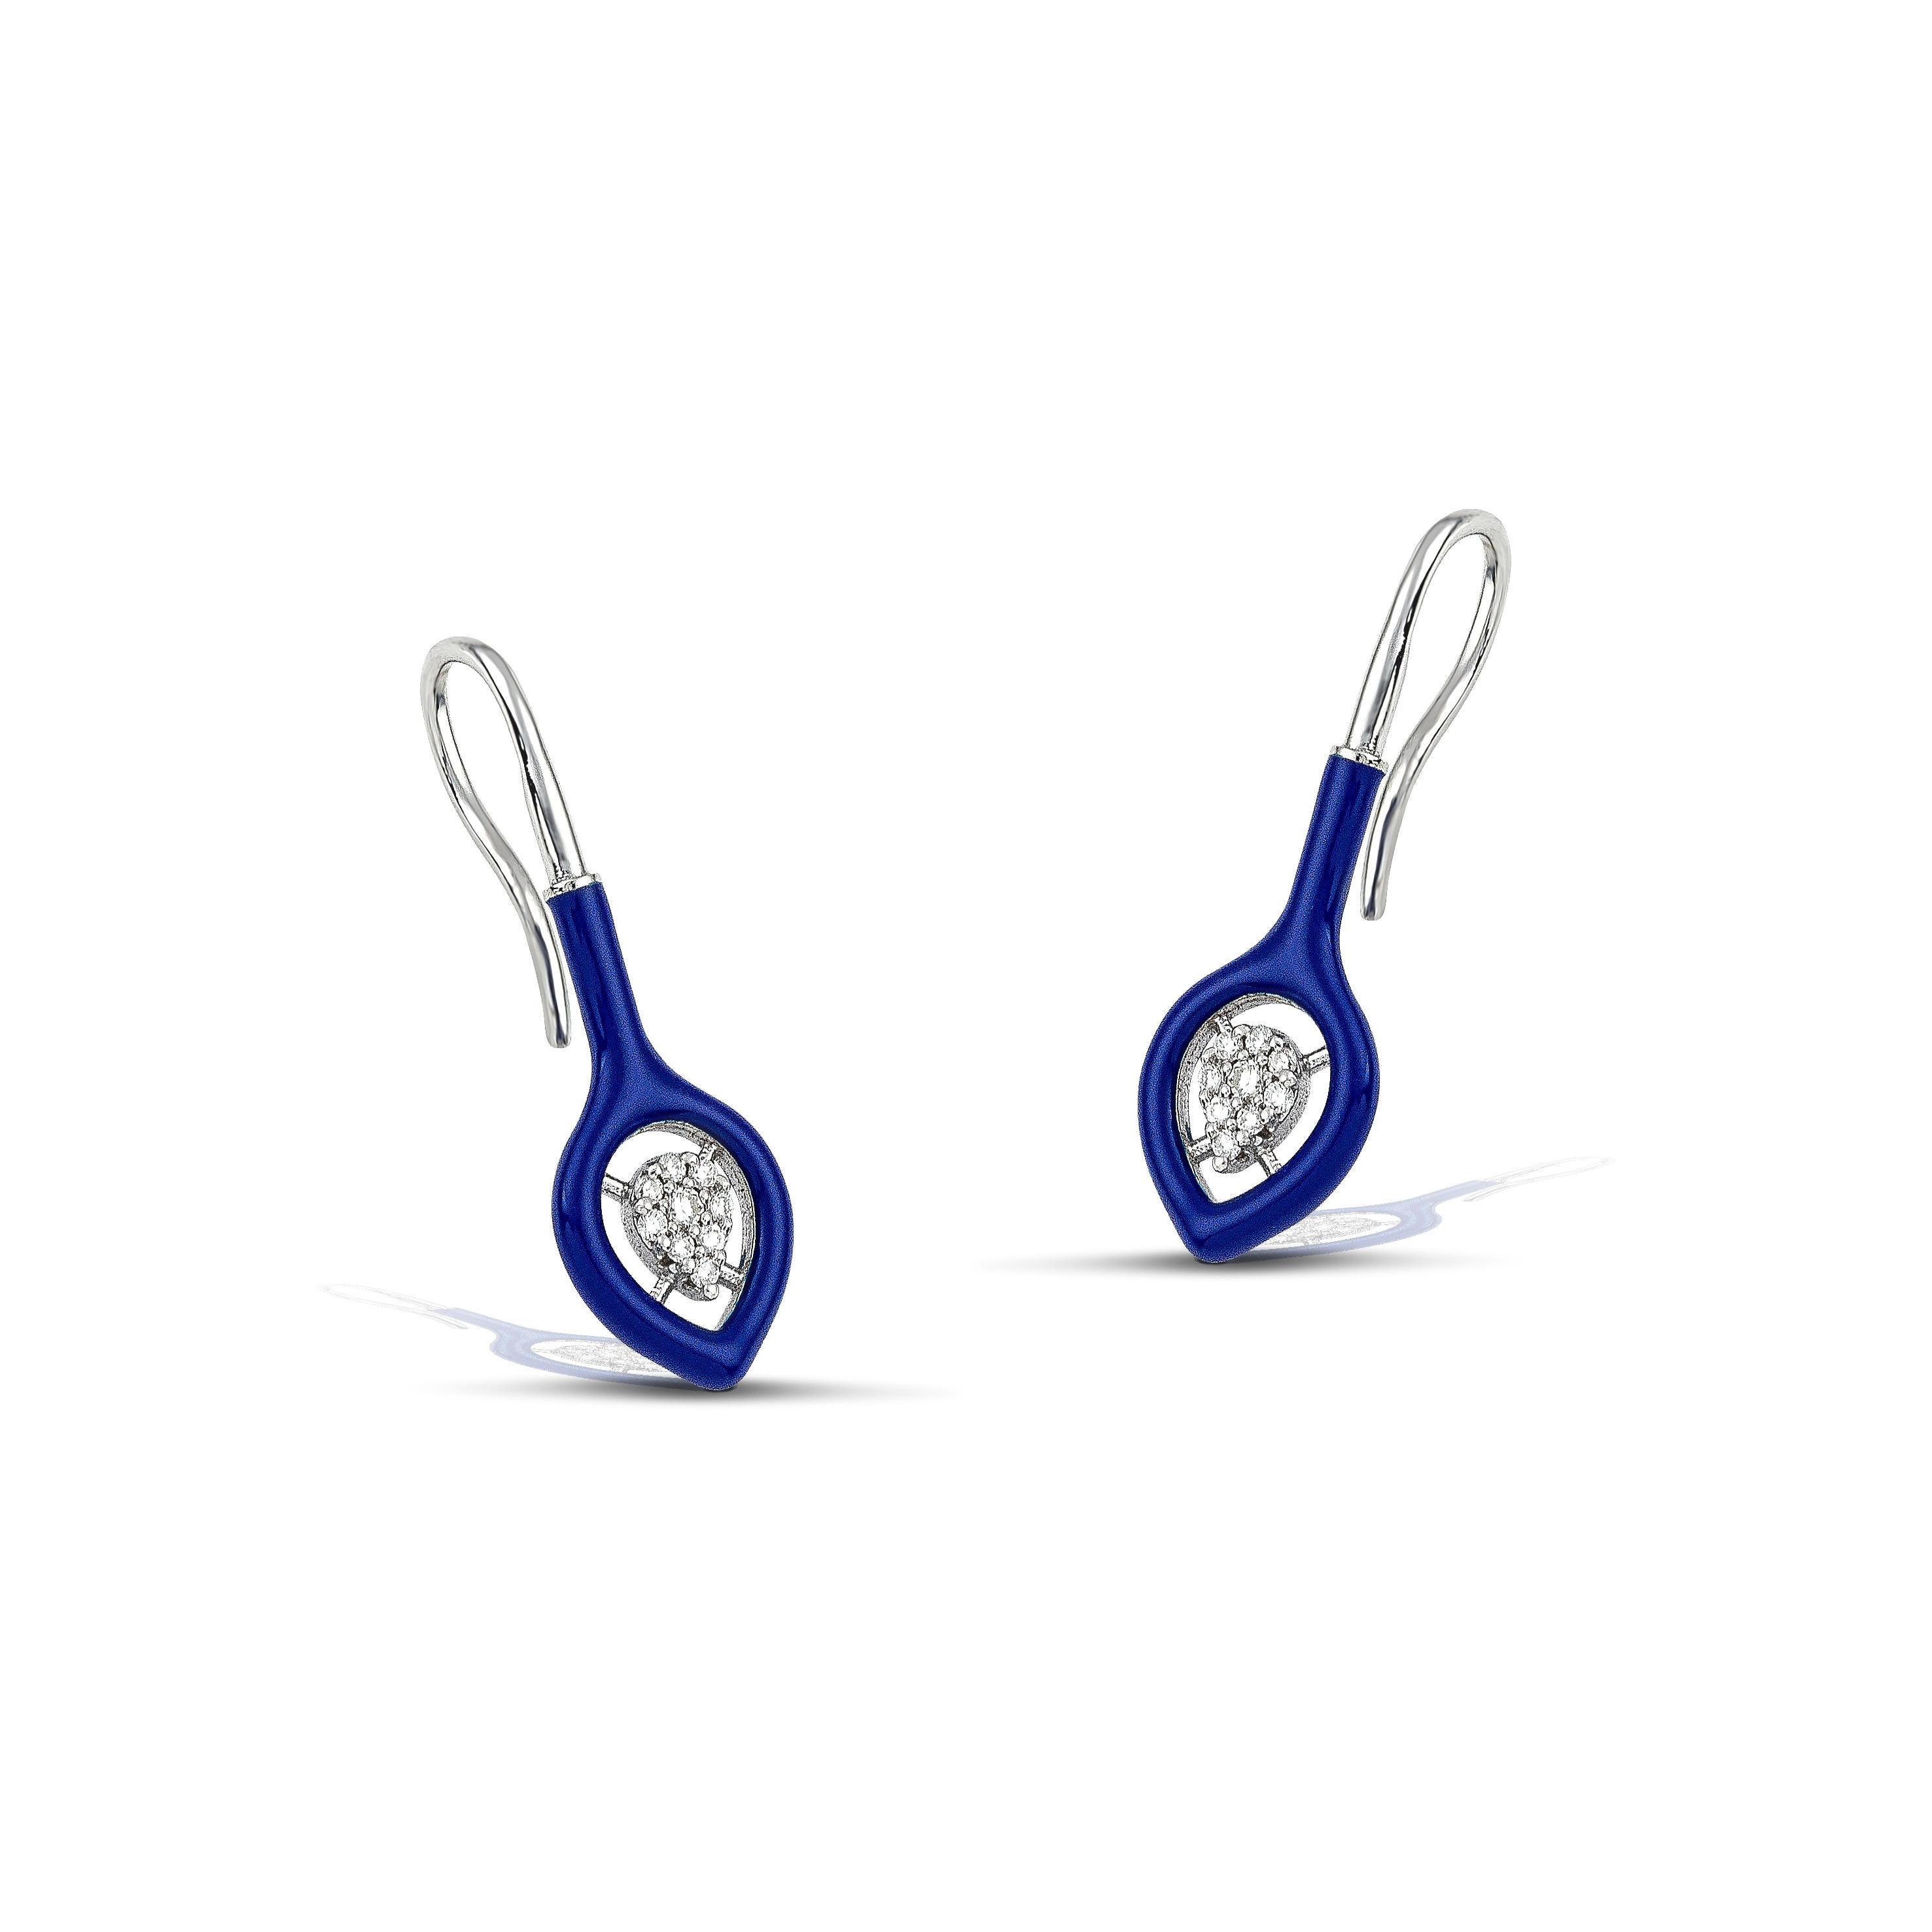 14K gold diamond earrings with a bold navy colour accent, the perfect gift for yourself or a loved one.
100% Recycled 14 K White Gold
Diamonds
Navy Enamel
Size: 3cm/1,18 inches
Inspiration: In the arts, maximalism, a reaction against minimalism, is